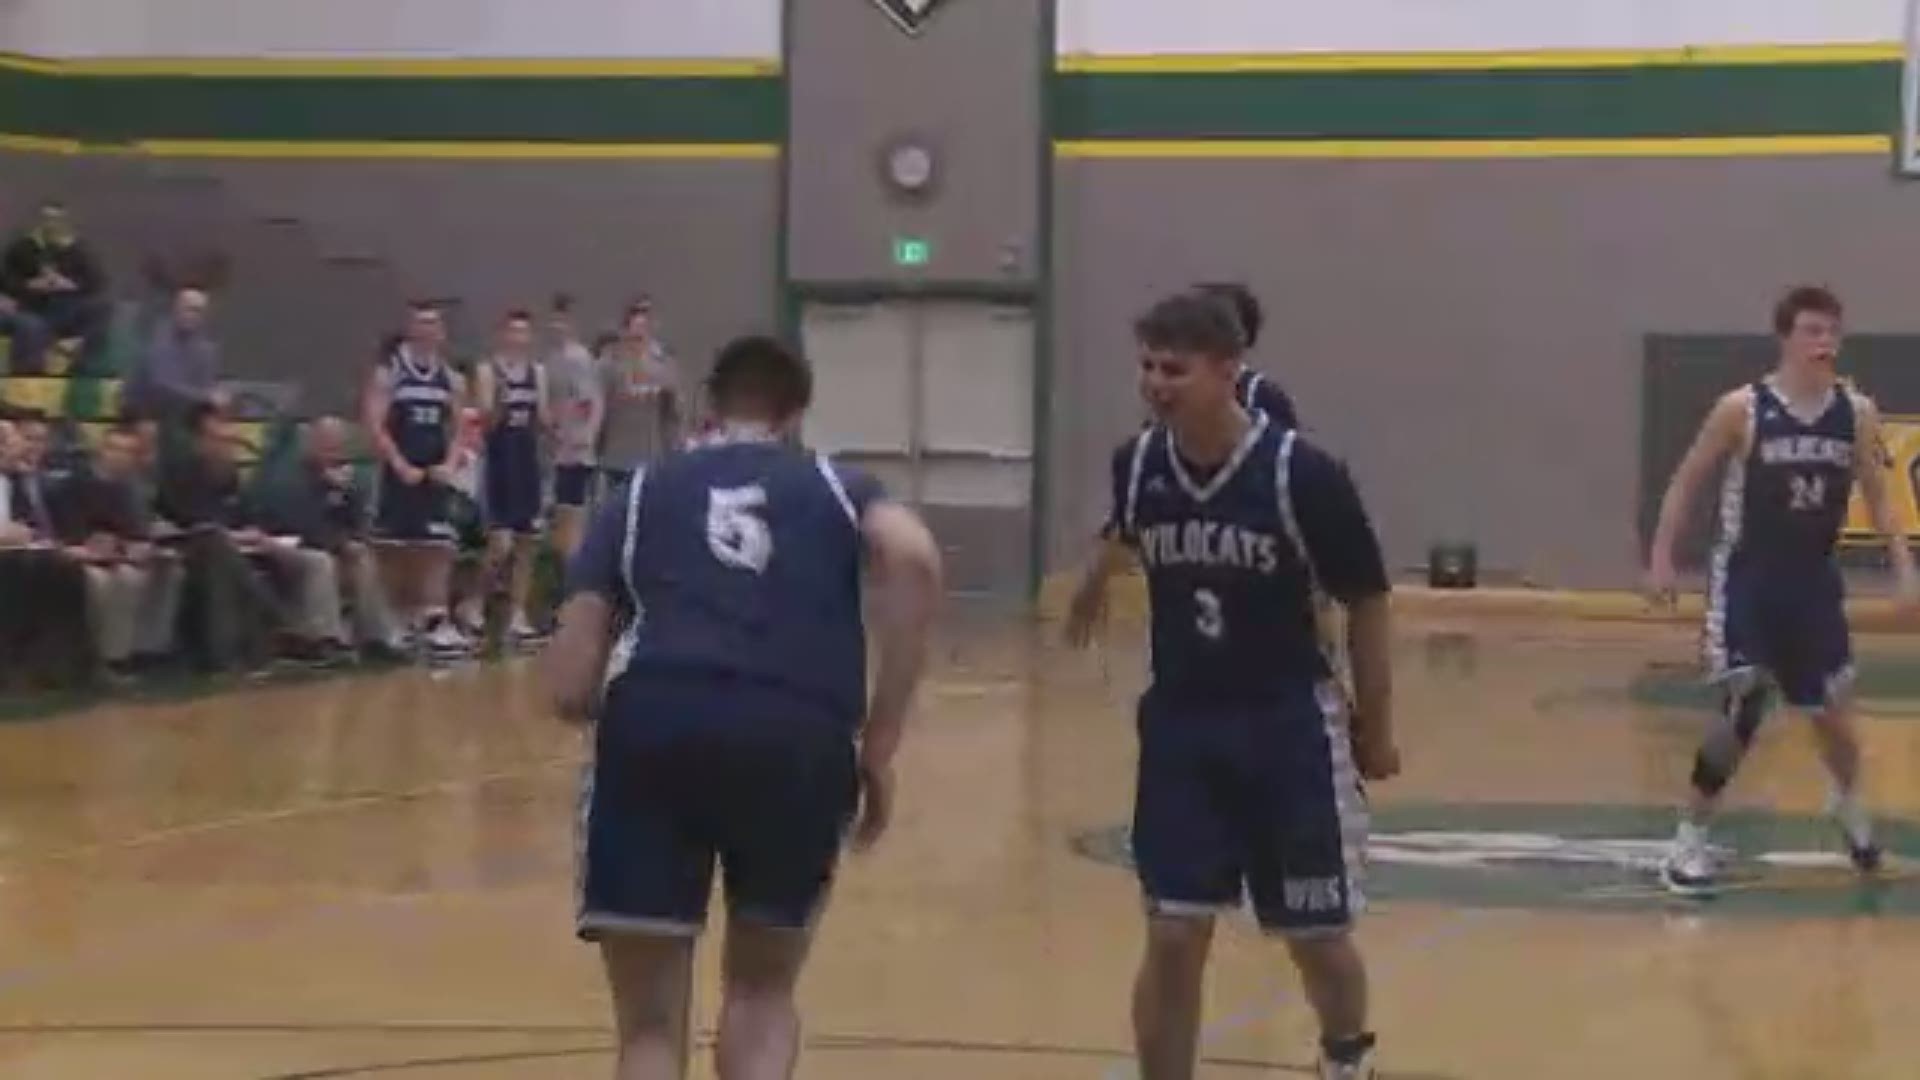 Highlights of the Wilsonville Wildcats 2019 boys basketball team. Highlights were part of KGW’s Friday Night Hoops coverage. #KGWPreps